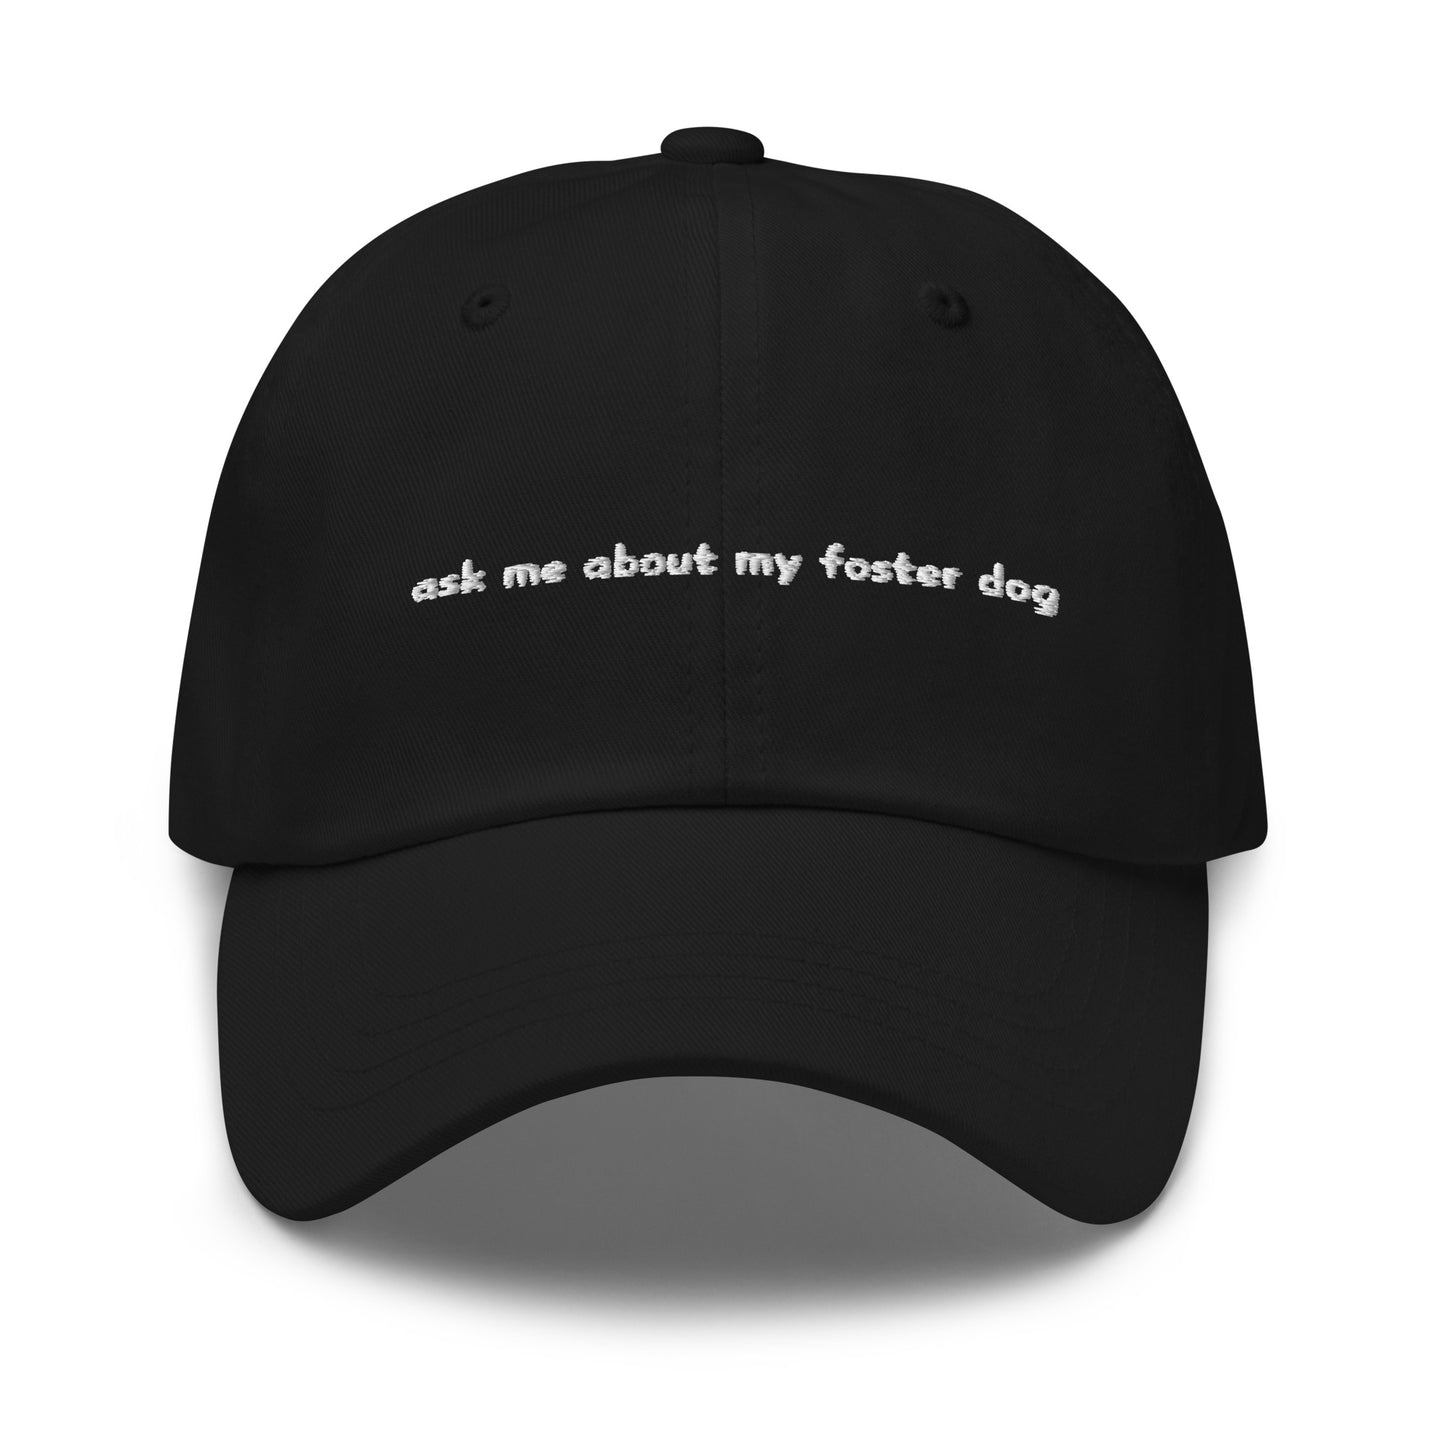 The Foster Dog Hat